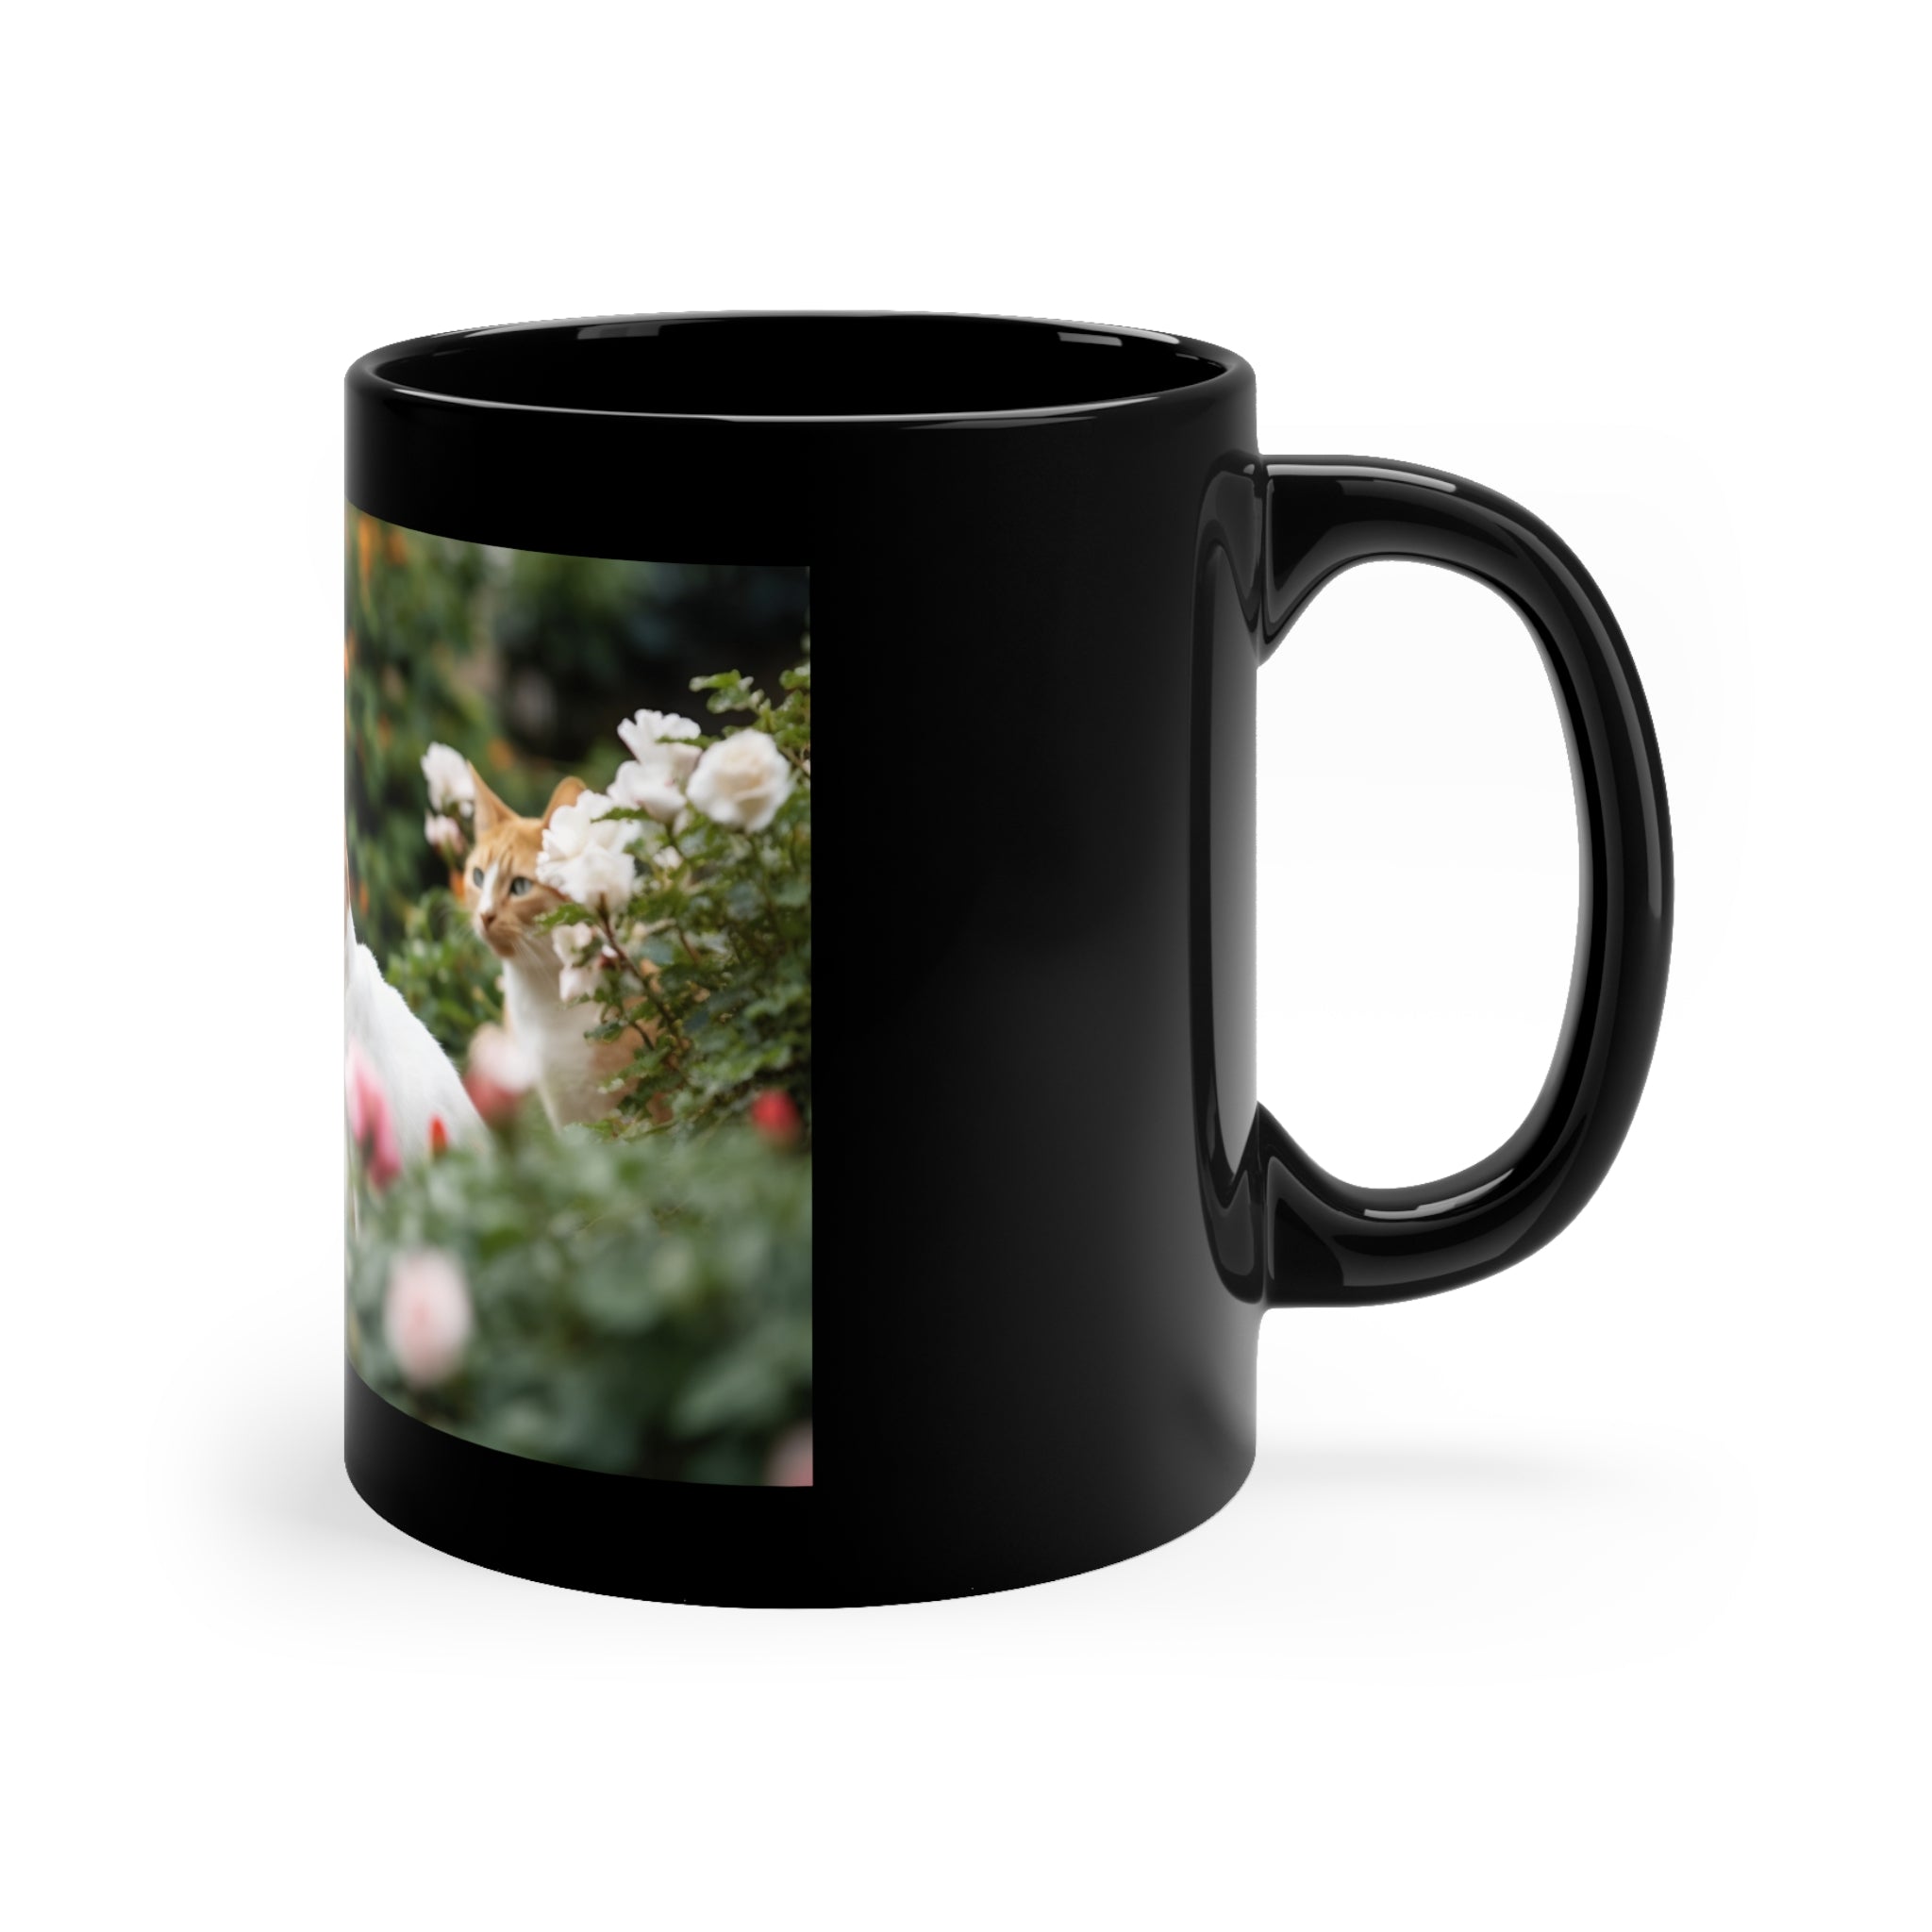 11oz Black Mug Photorealistic Beautiful Garden with Cats Pet Paradise - Black Coffee Cup - Garden Delight with Cats - Animal Lover's gift